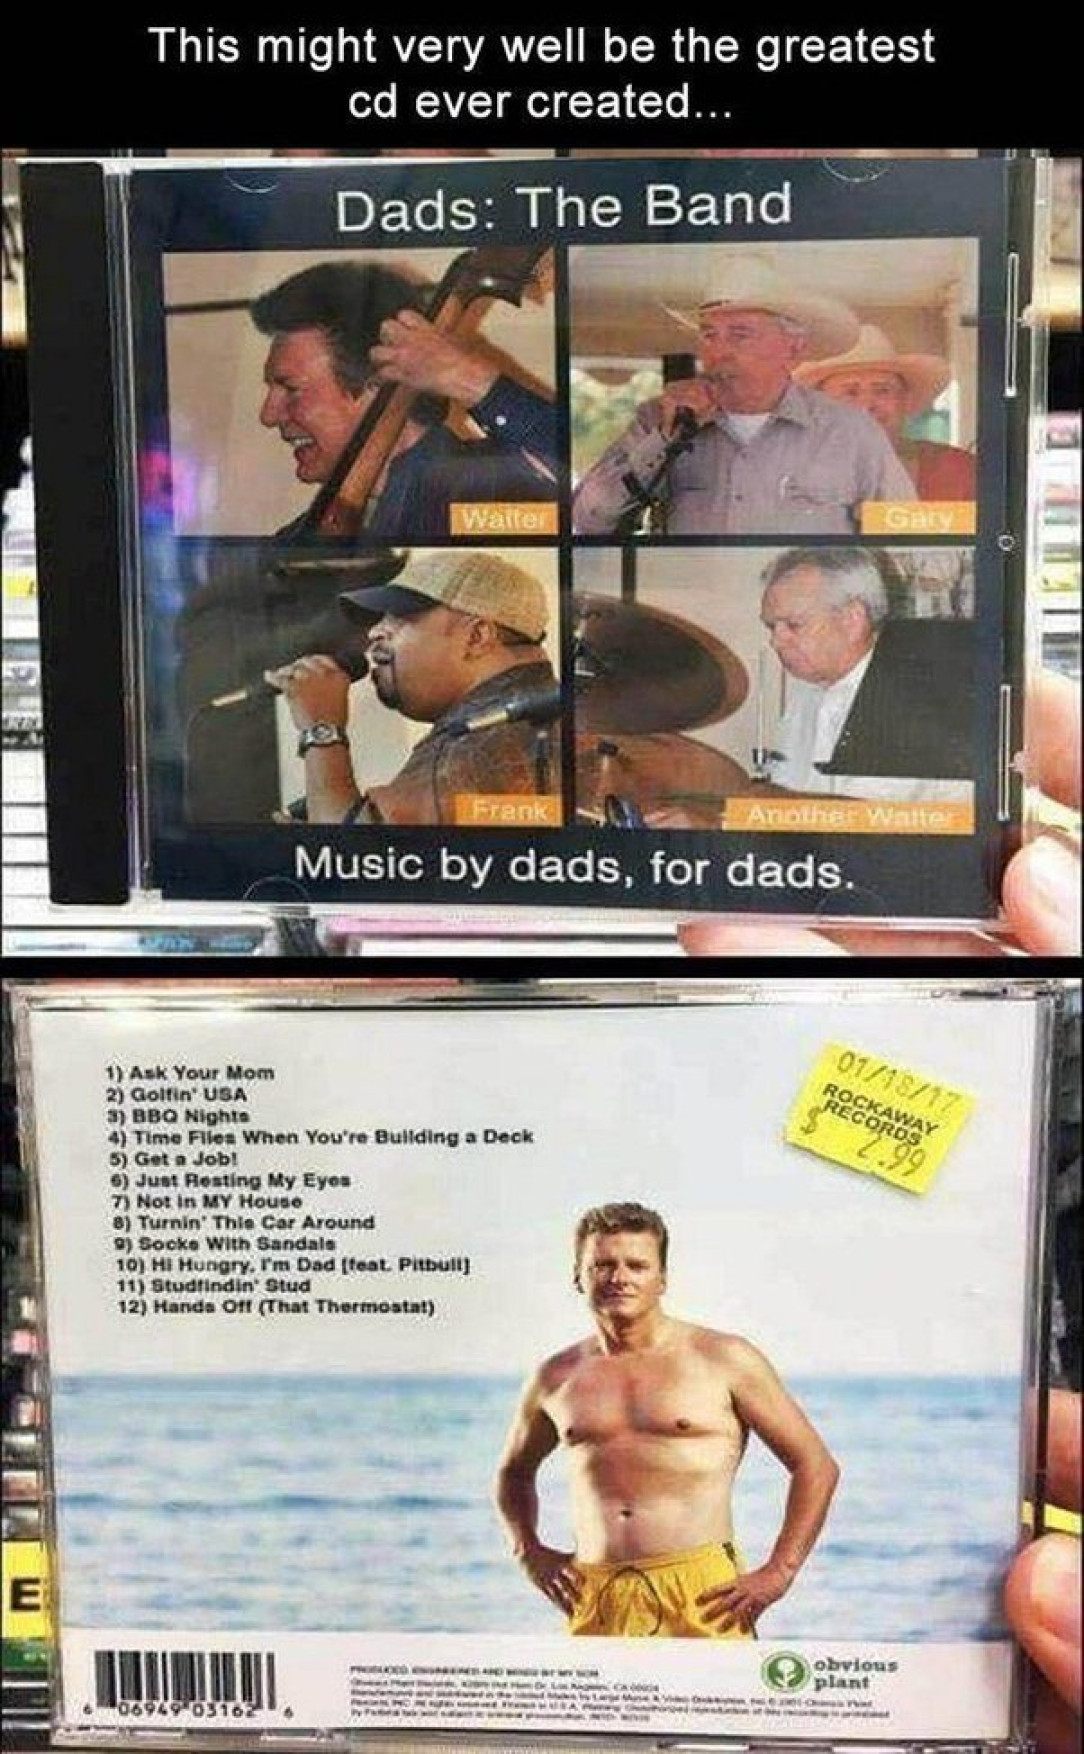 dads: the band